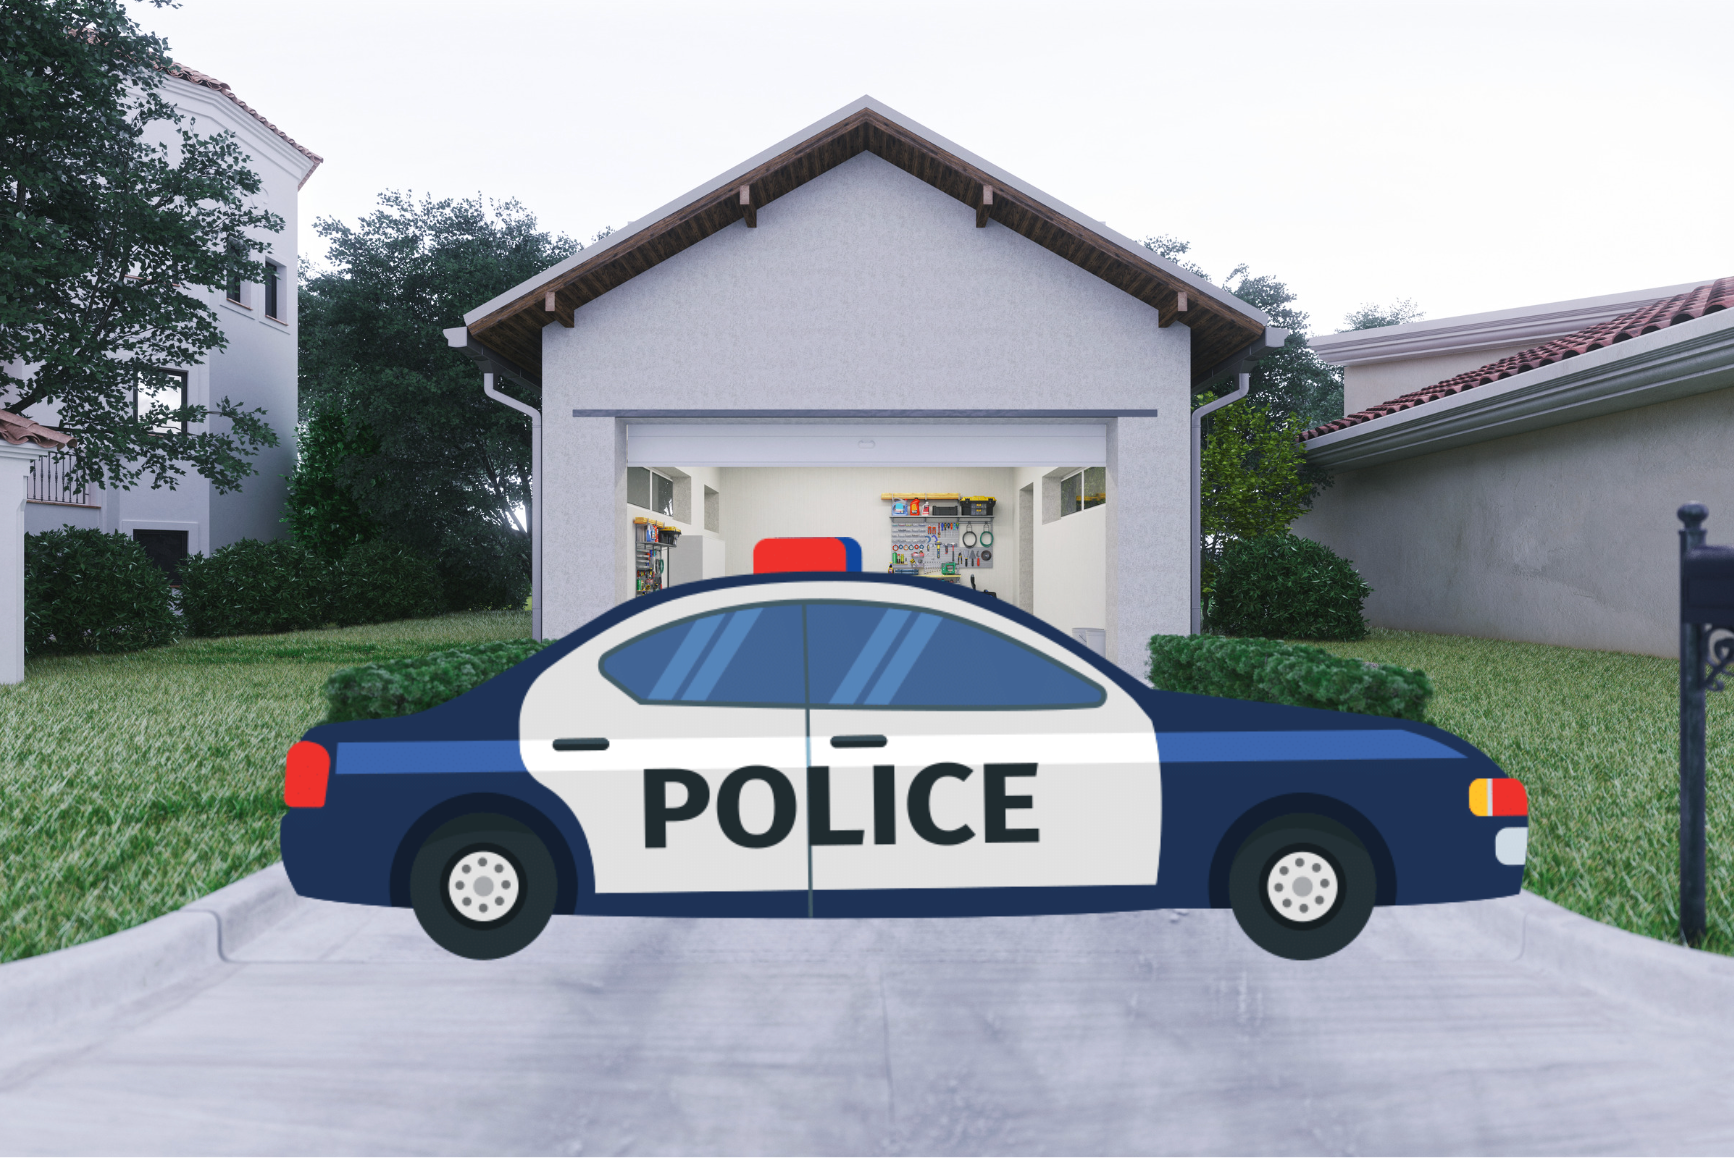 Can Police Block My Driveway?